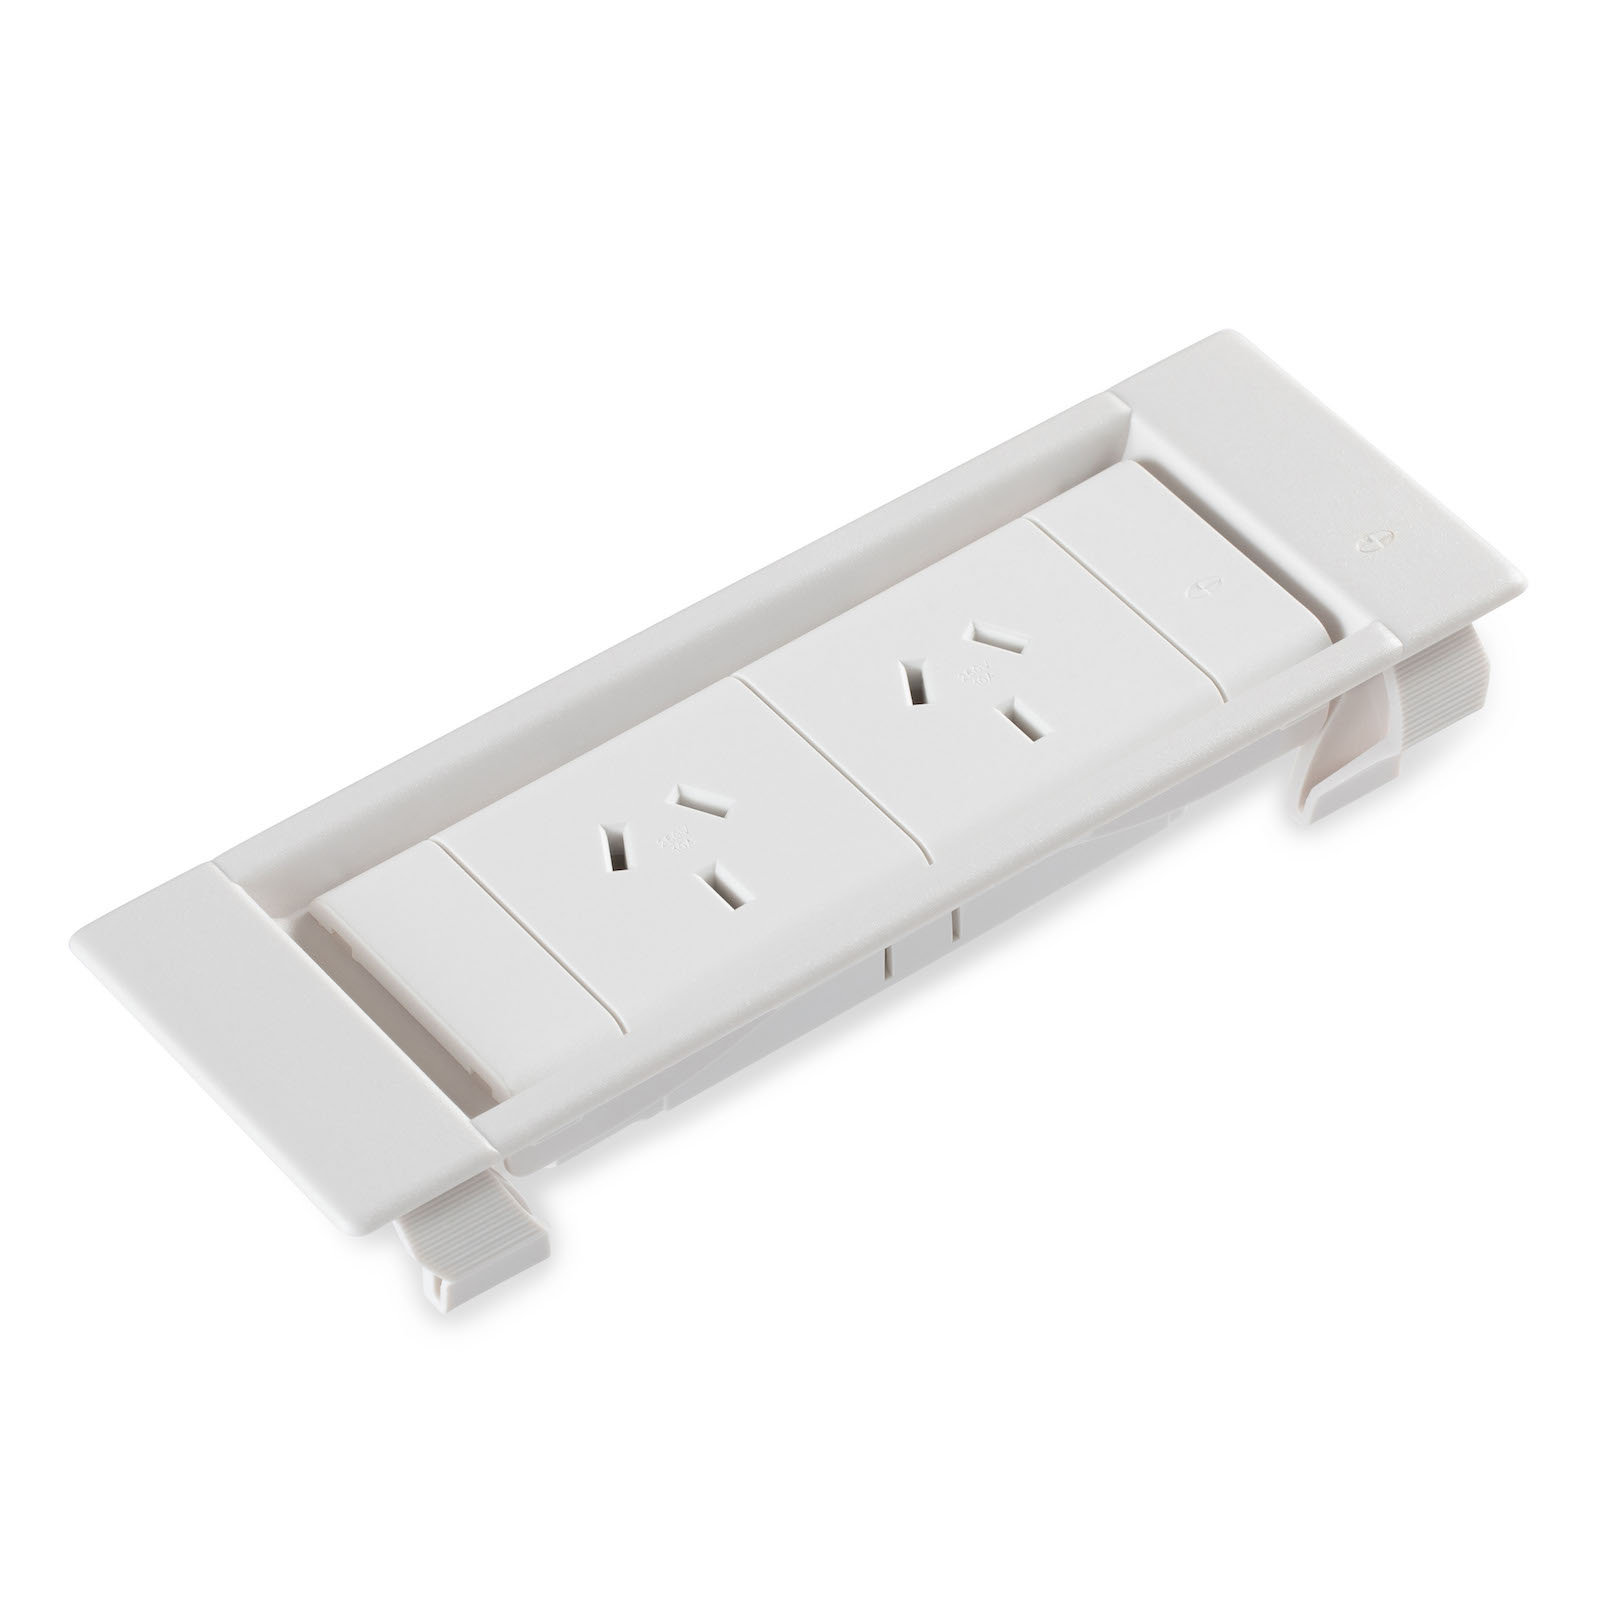 SW1812 – Dual GPO Mounted In Thick Panel Bracket